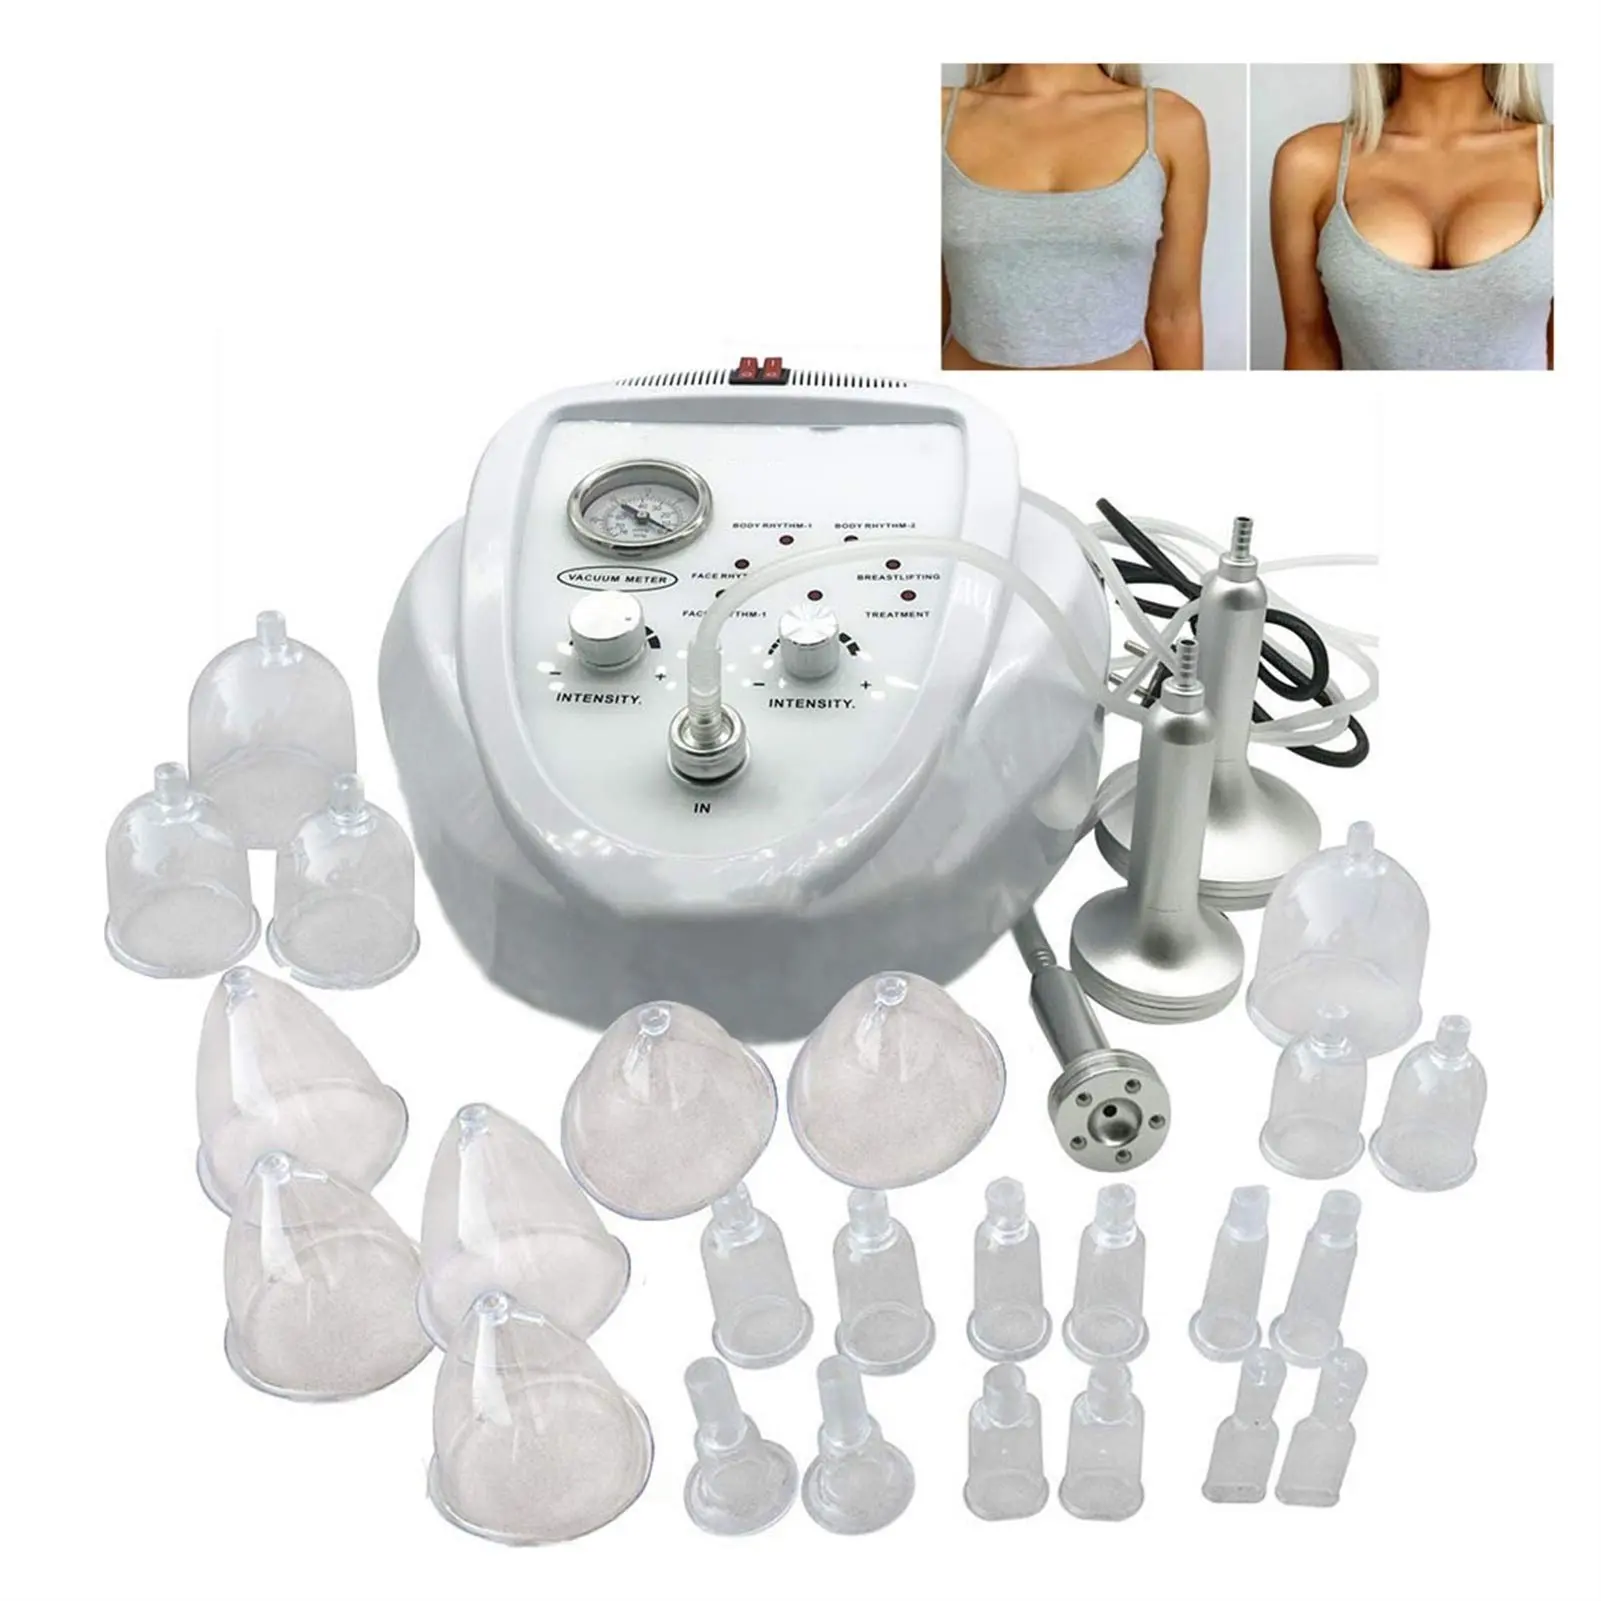 physical therapy equipments vacuum therapy machine Fat loss Massage/Slim SPA Breast enhancement Vacuum therapy